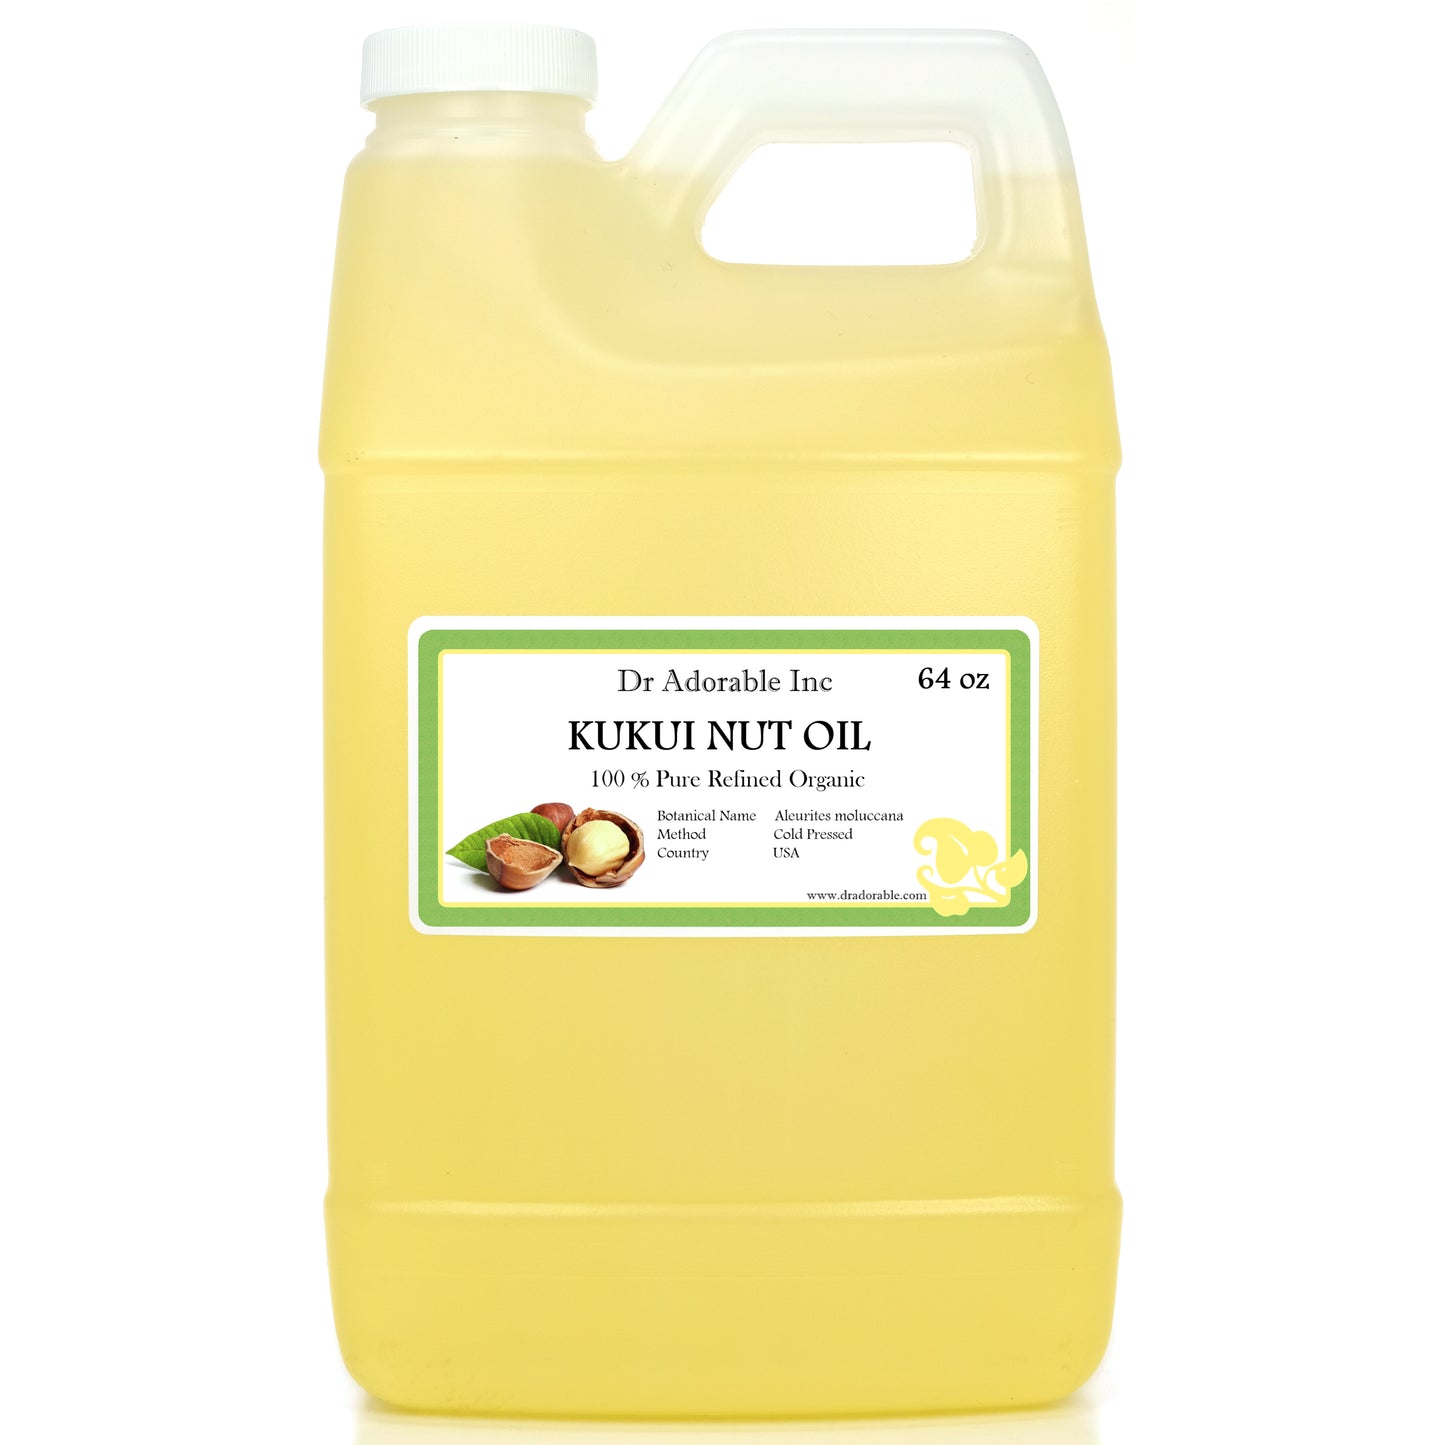 Kukui Nut Oil - 100% Pure Natural Organic Cold Pressed